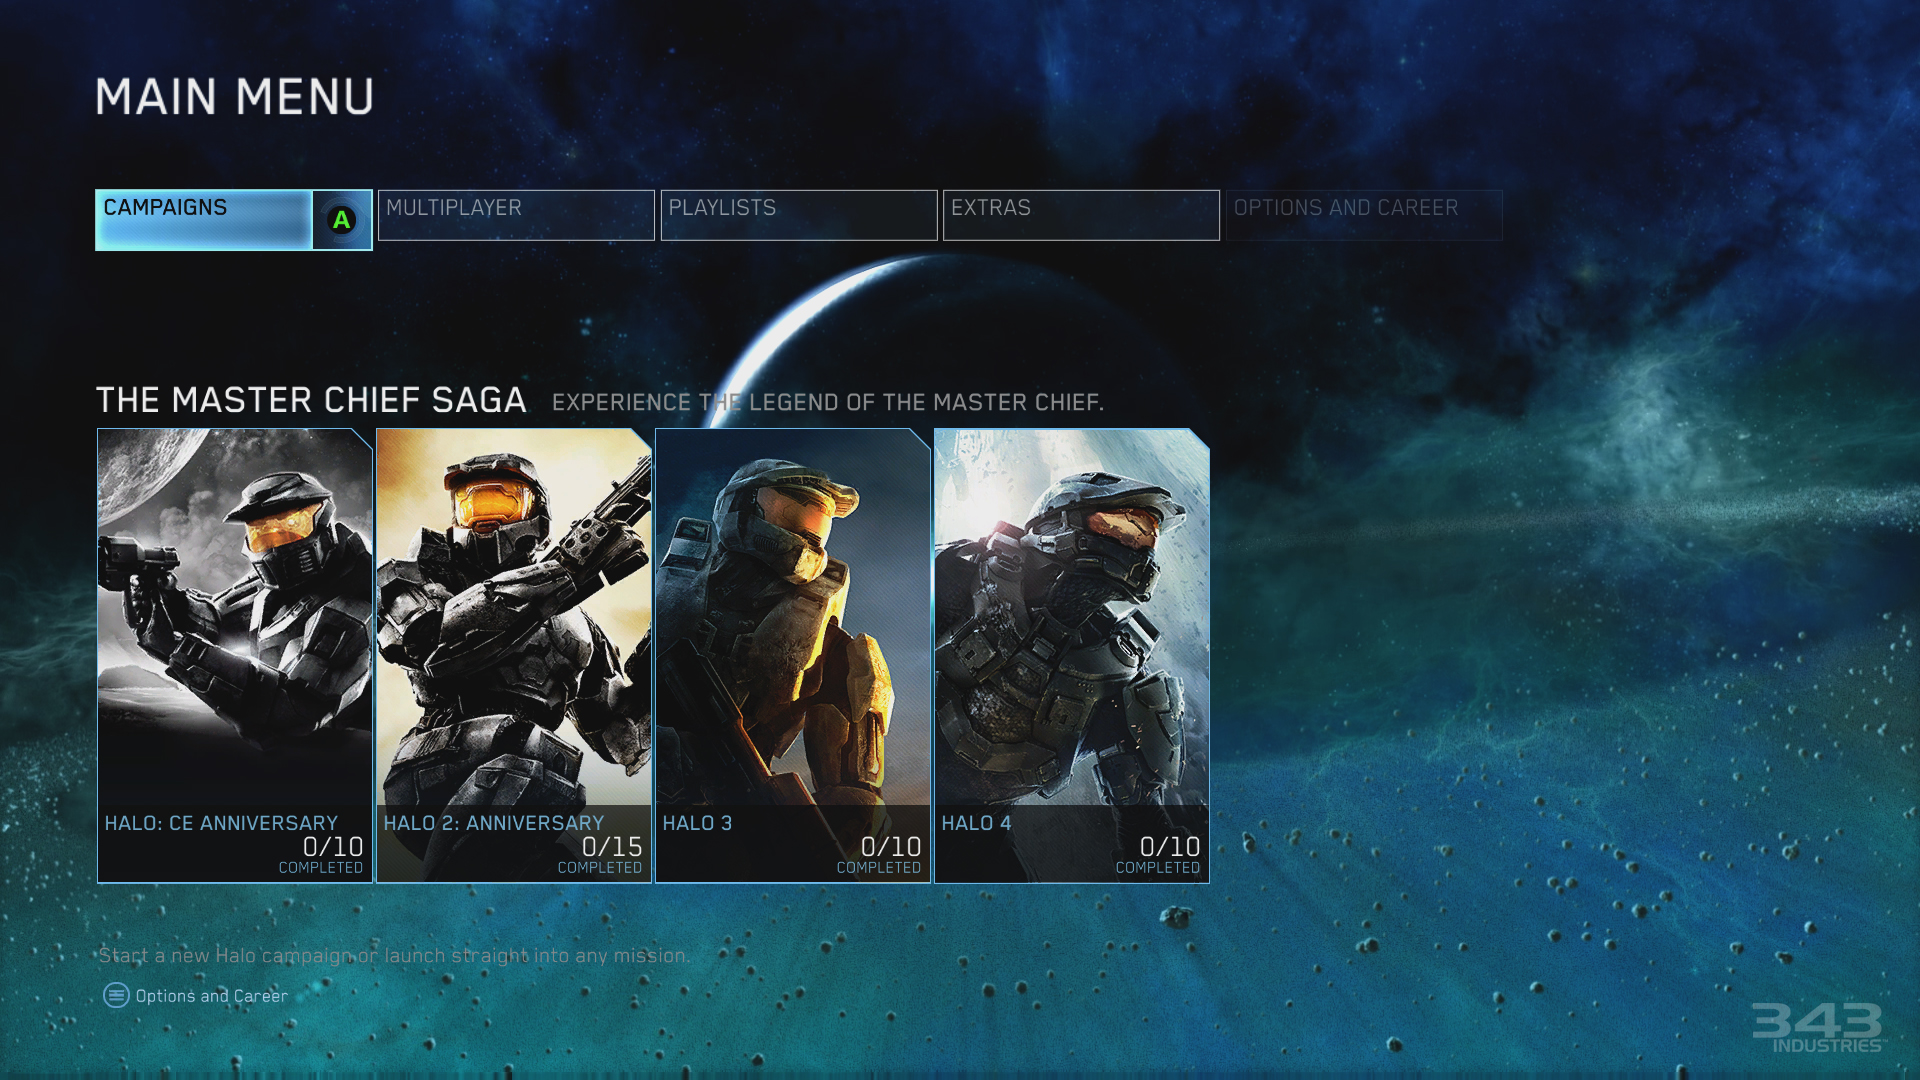 E3 2014 Halo The Master Chief Collection Menu - The Legend's Journey